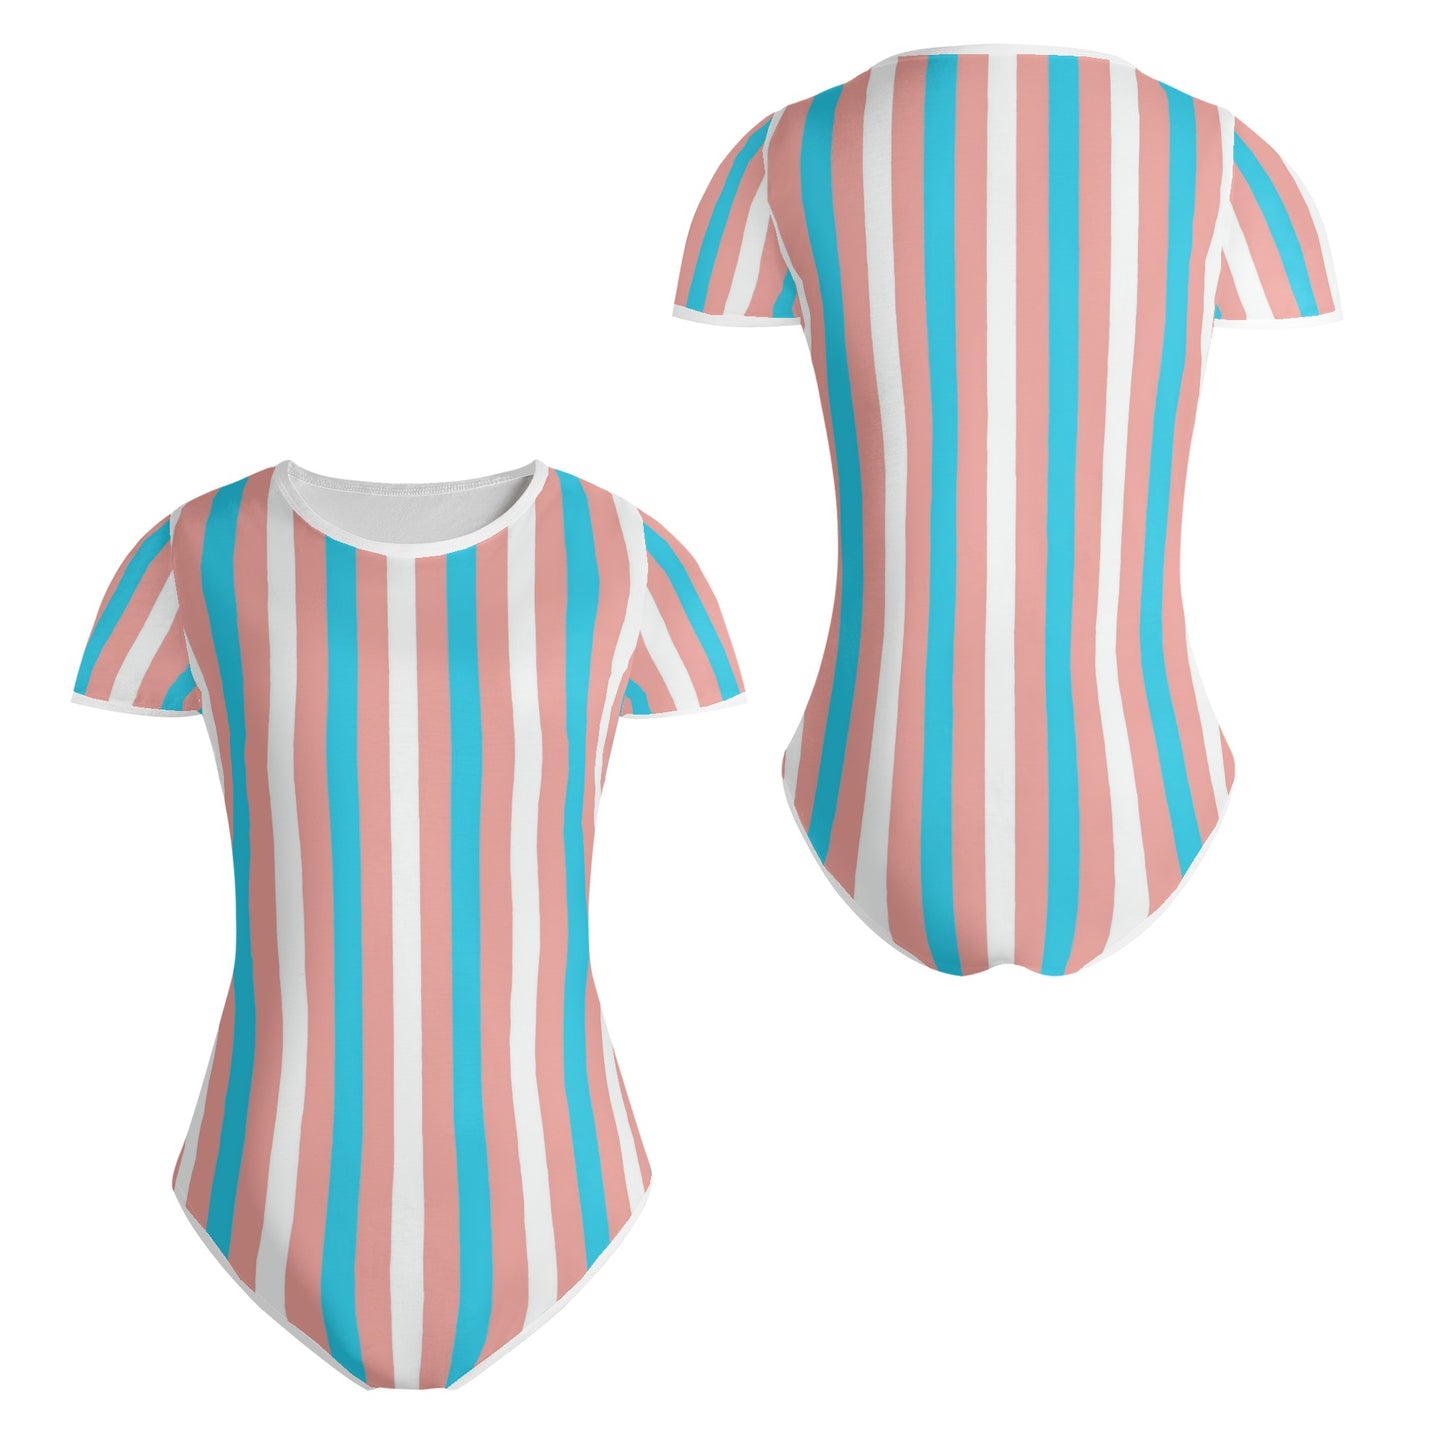 Teen Blue Pink White Pride Candy Striped Soft T-Shirt Bodysuit